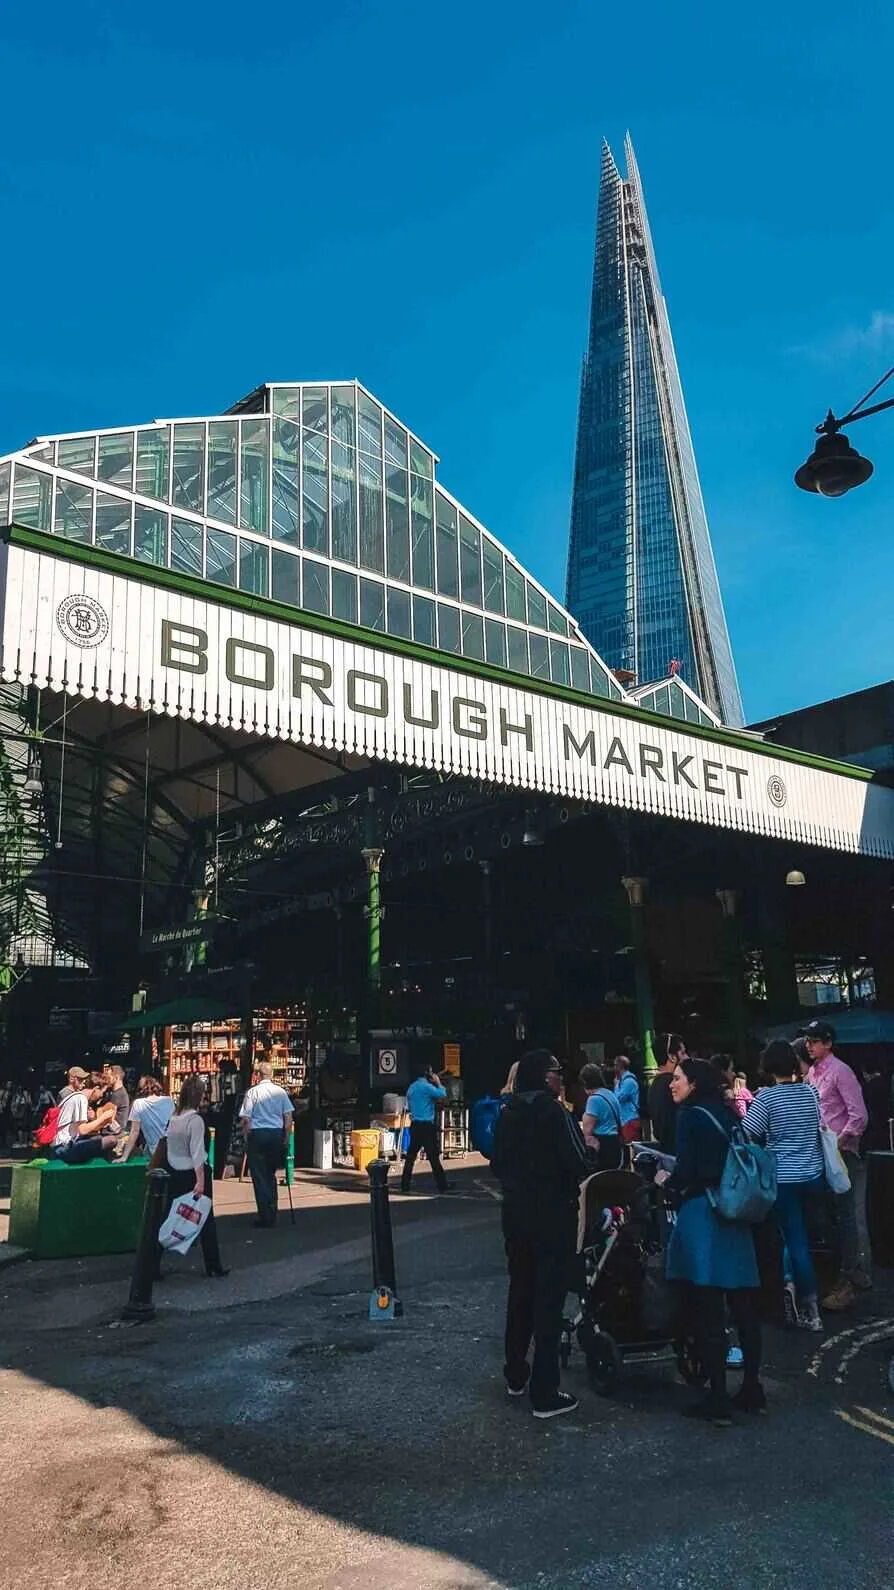 Borough Markets is on everyone's must-see list for good reason! The food here is amazing. If you come during the week you find the markets a little less crowded then on a Saturday. 